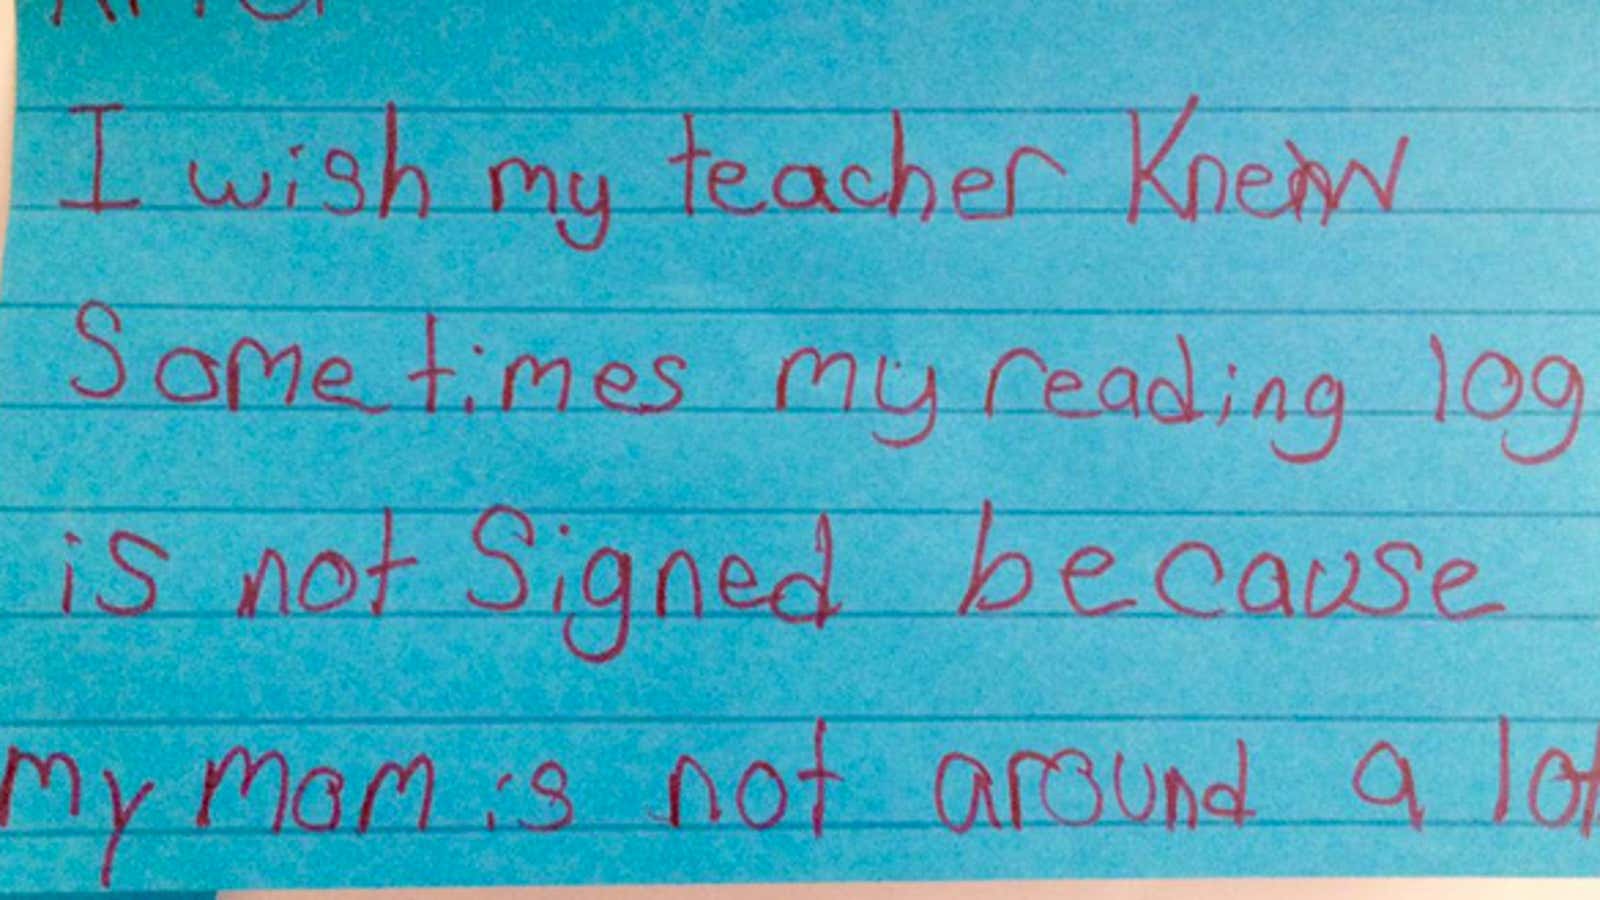 What poor students wish their teachers knew about them